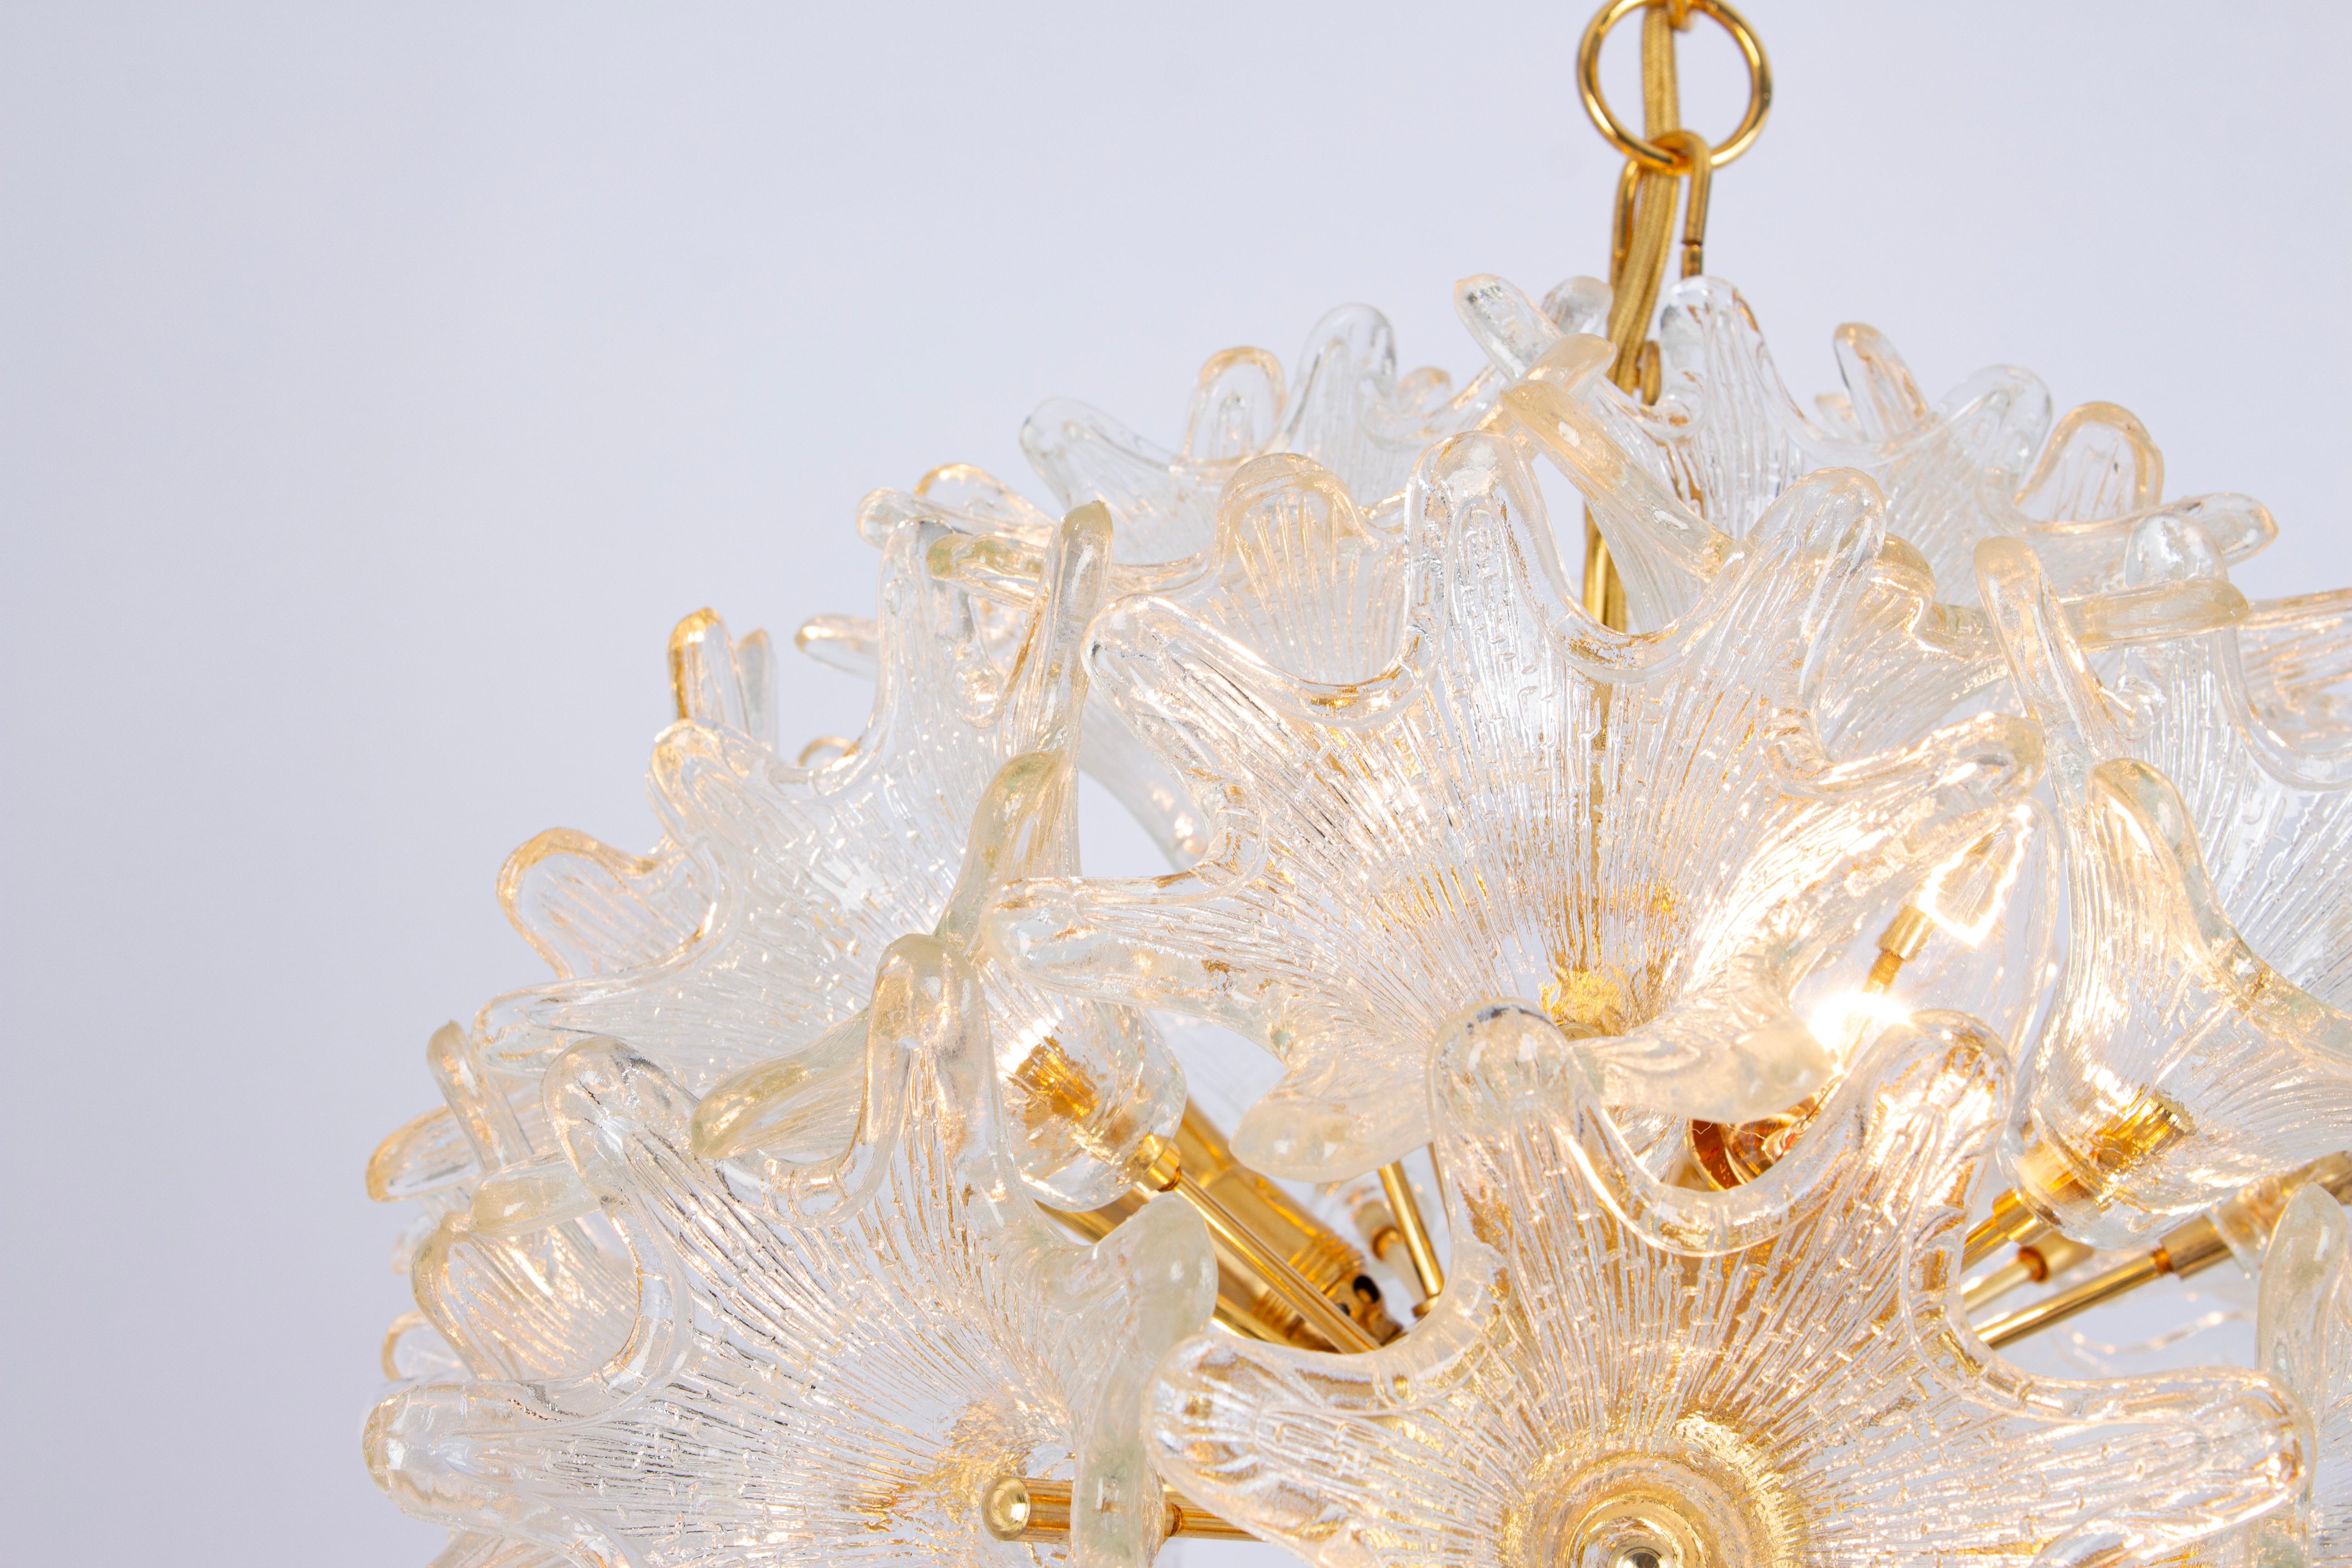 Late 20th Century Spectacular Murano Glass Sunburst Flower Chandelier by Venini VeArt, Italy 1970s For Sale